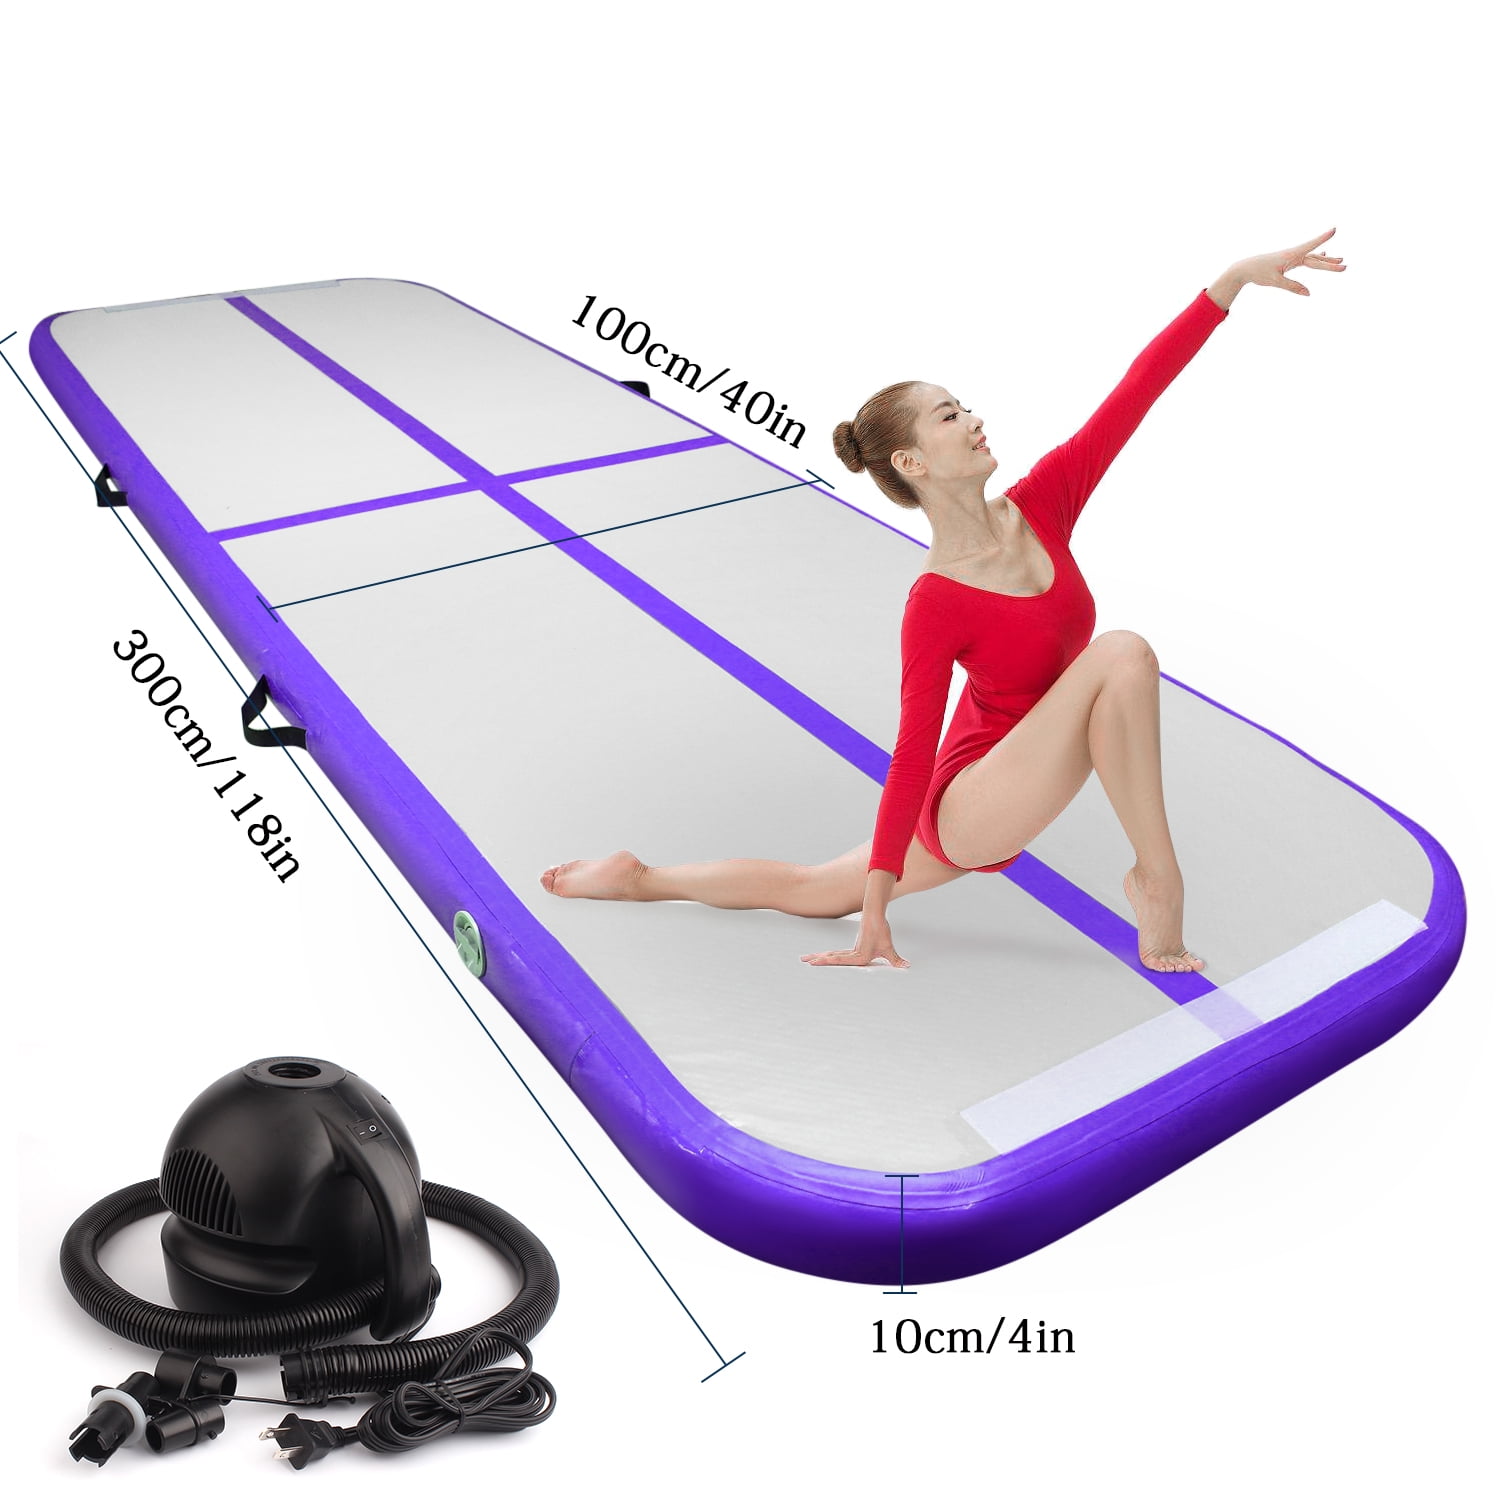 Niome 10ft/20ft/26ft Inflatable Gymnastics Air Track Tumbling Mat Waterproof Airtrack Mats for Home Use/KidsTraining/Cheerleading/Yoga/Water w/Pump 